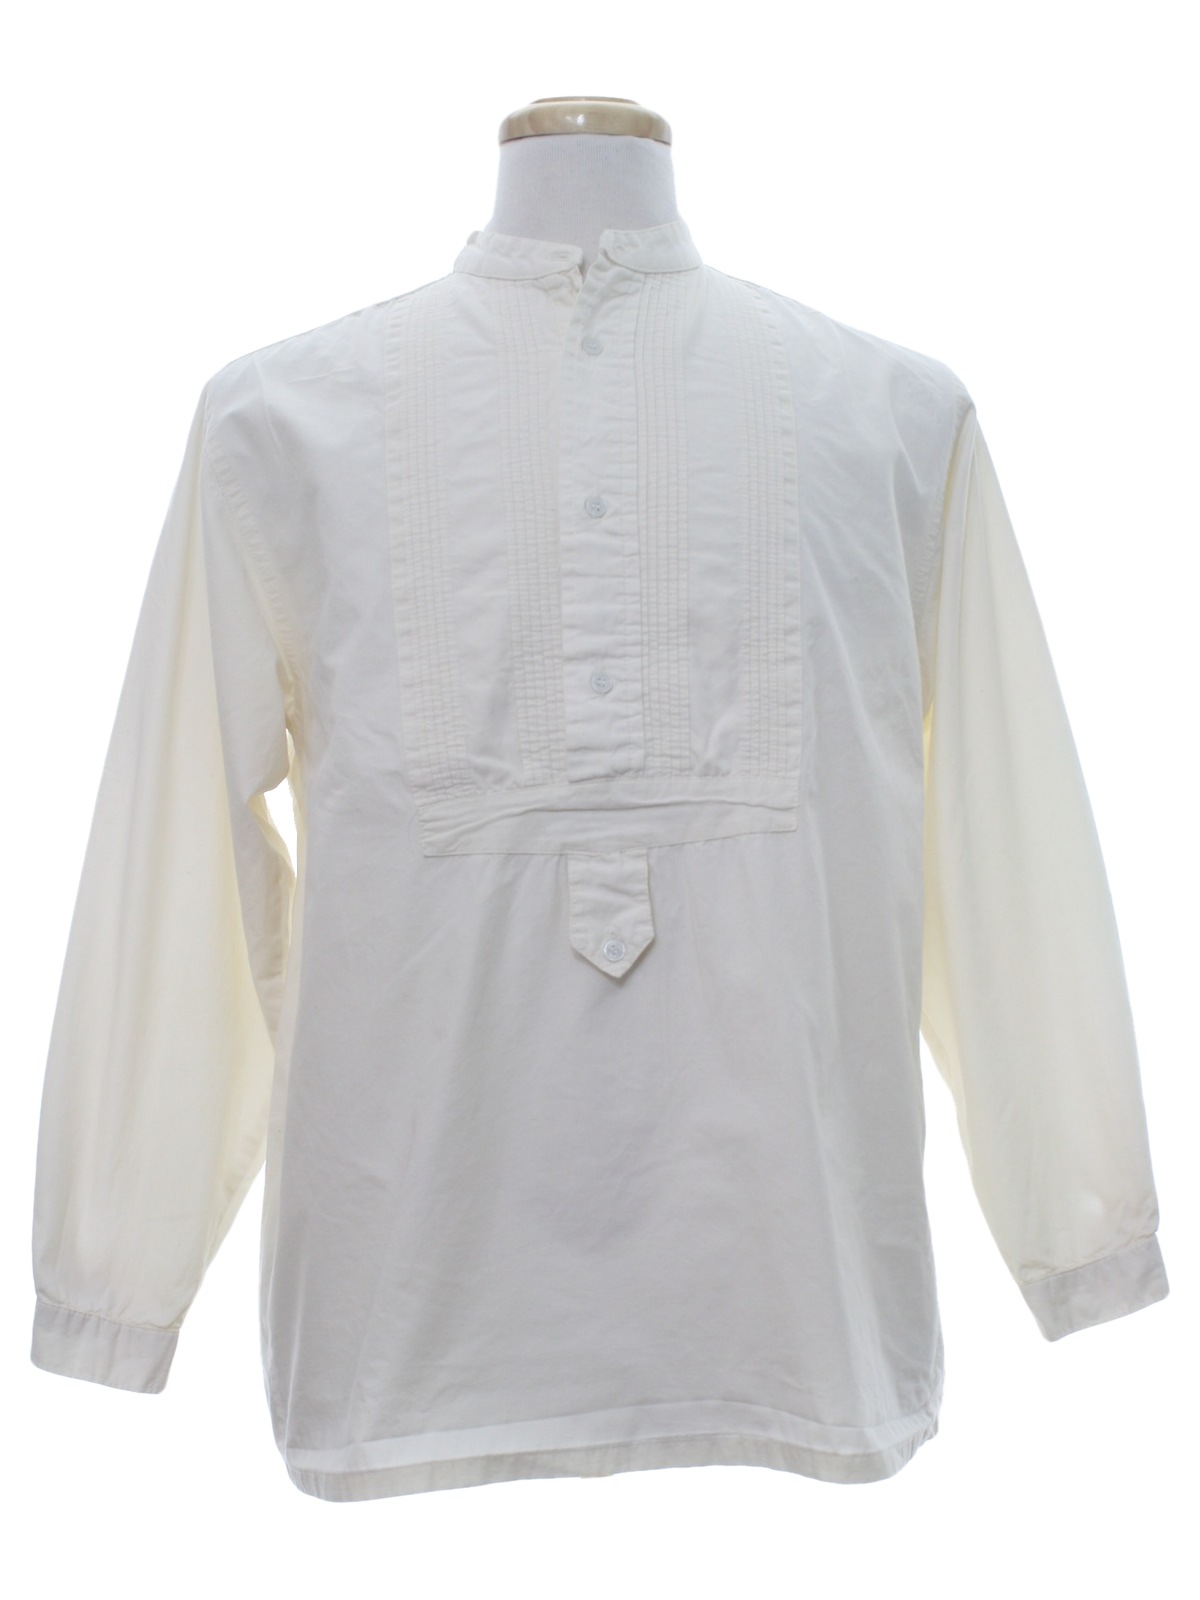 Western Shirt: Pre 1920s Style -Wah Maker- Mens off white background ...